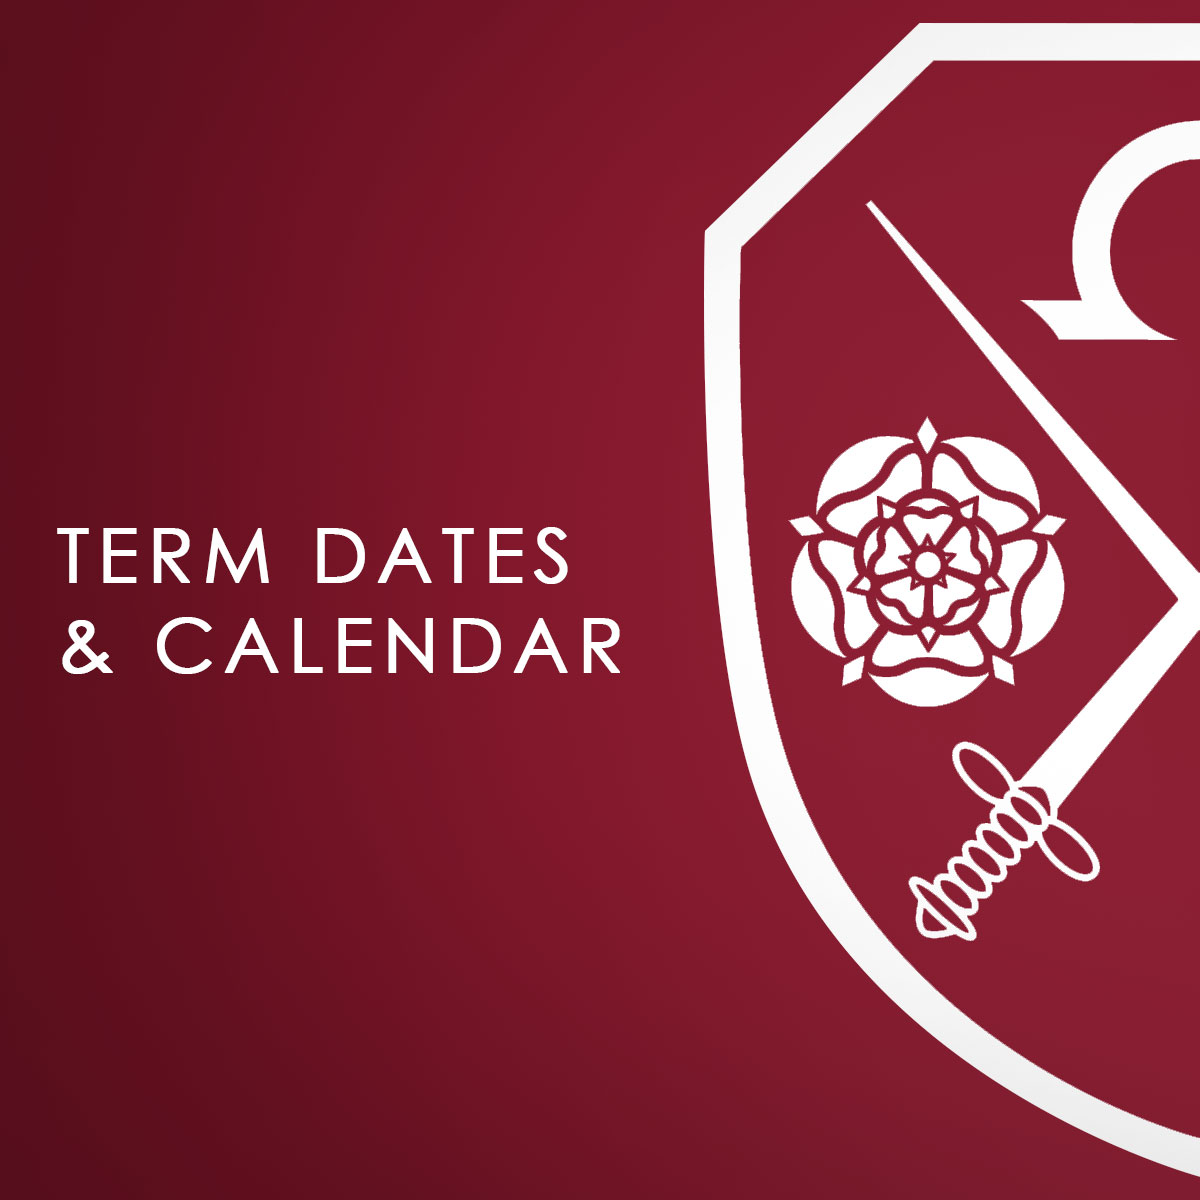 A maroon background with the East Barnet School logo which says Term Dates and Calendar